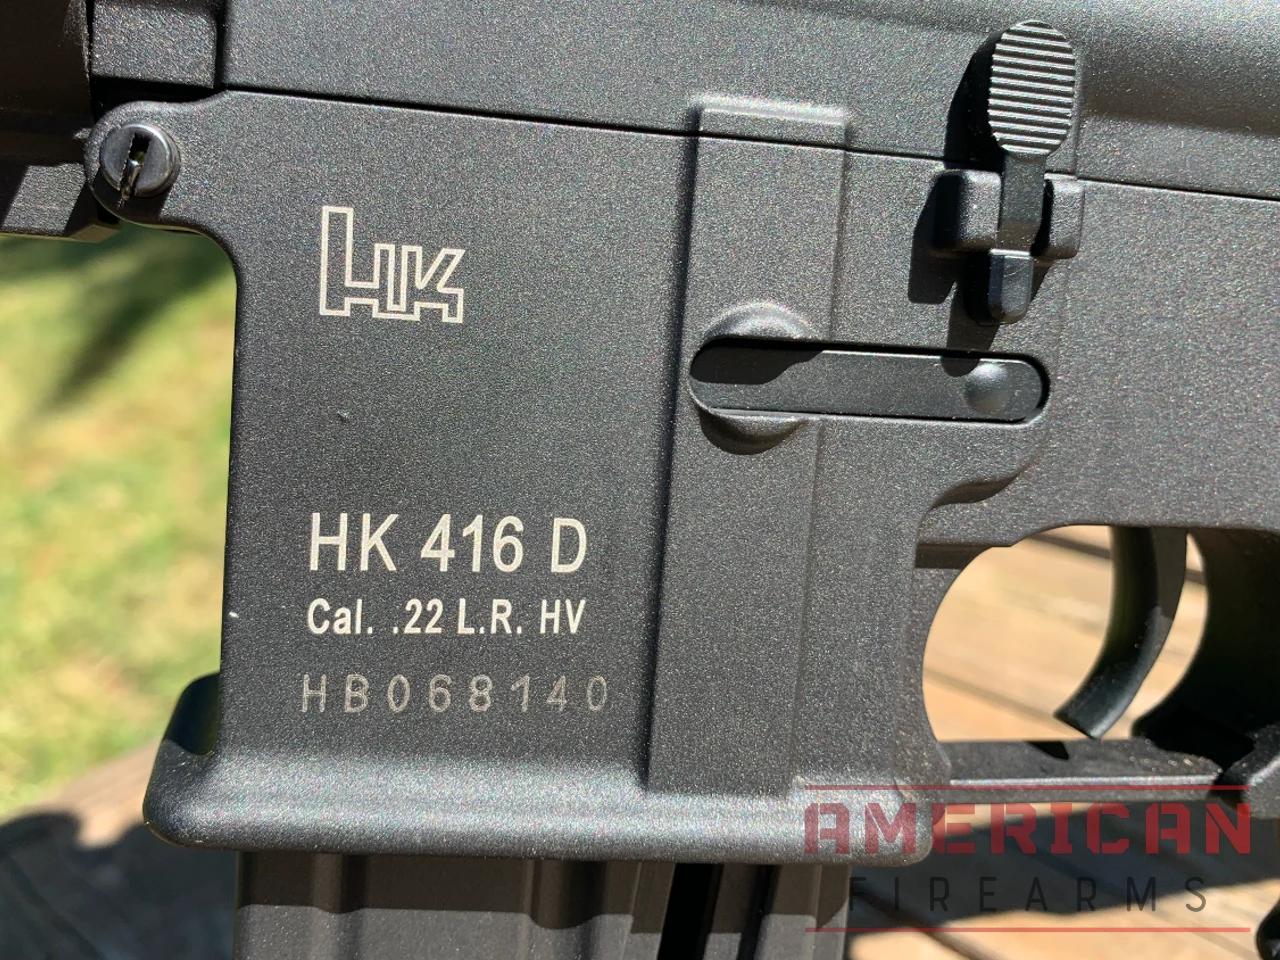 HK brand mark is scrawled in white, so it really pops against the black background.